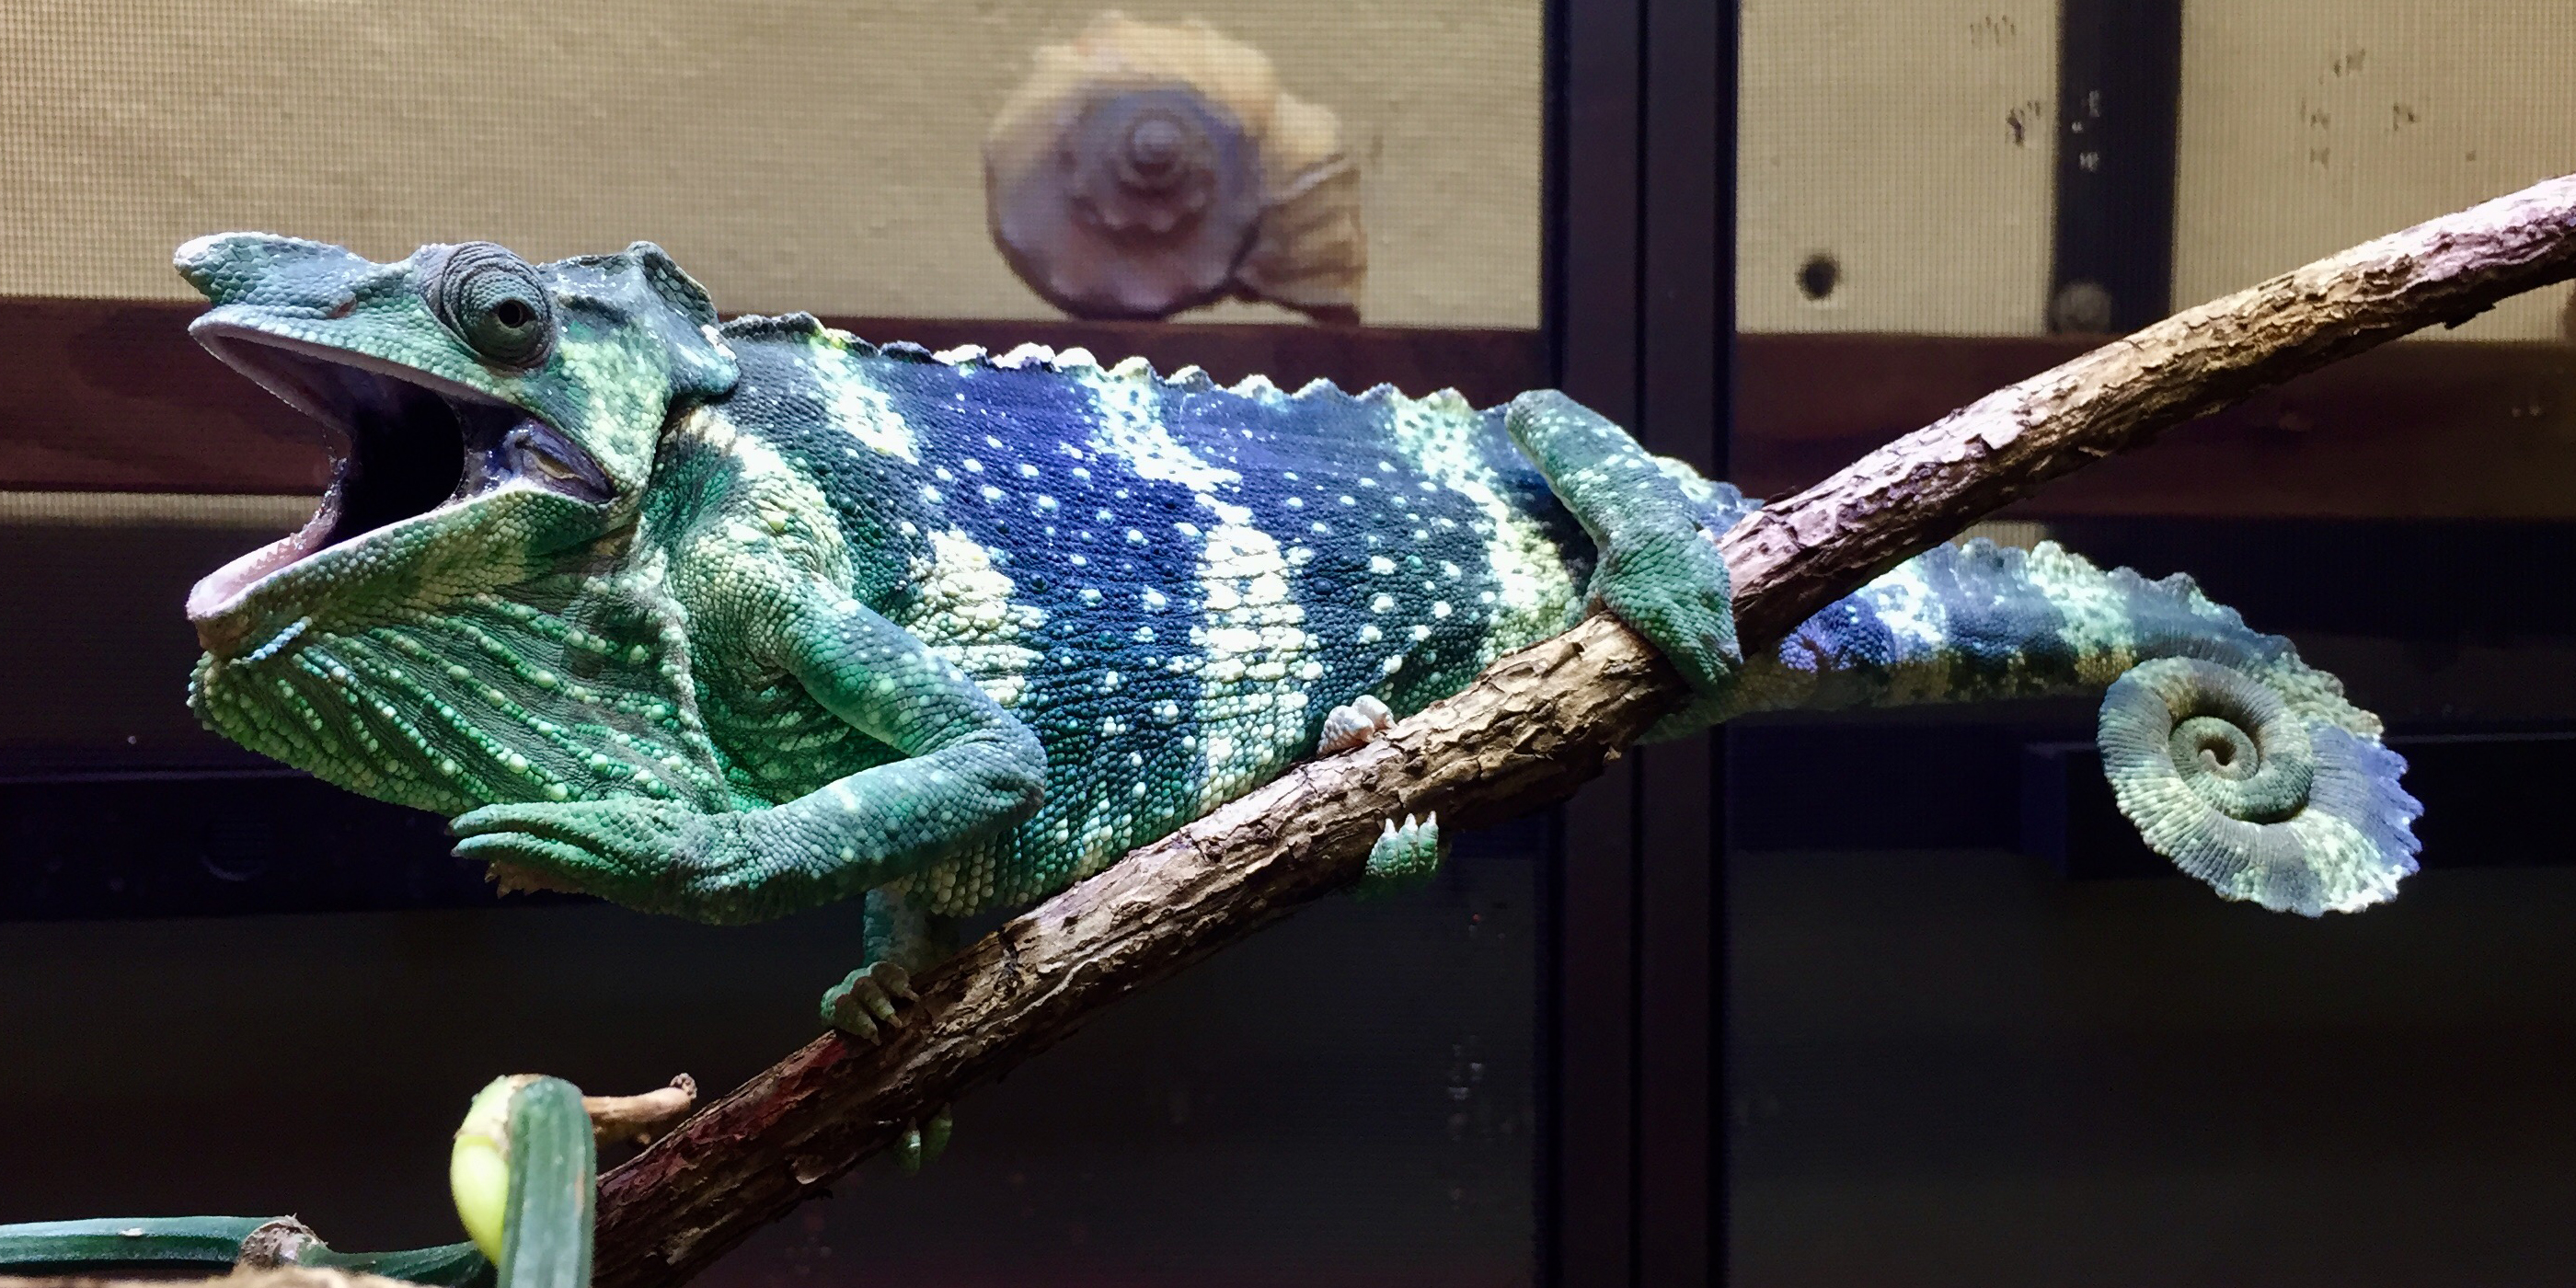 New at the Zoo: Meet a Meller's Chameleon | Smithsonian's National Zoo